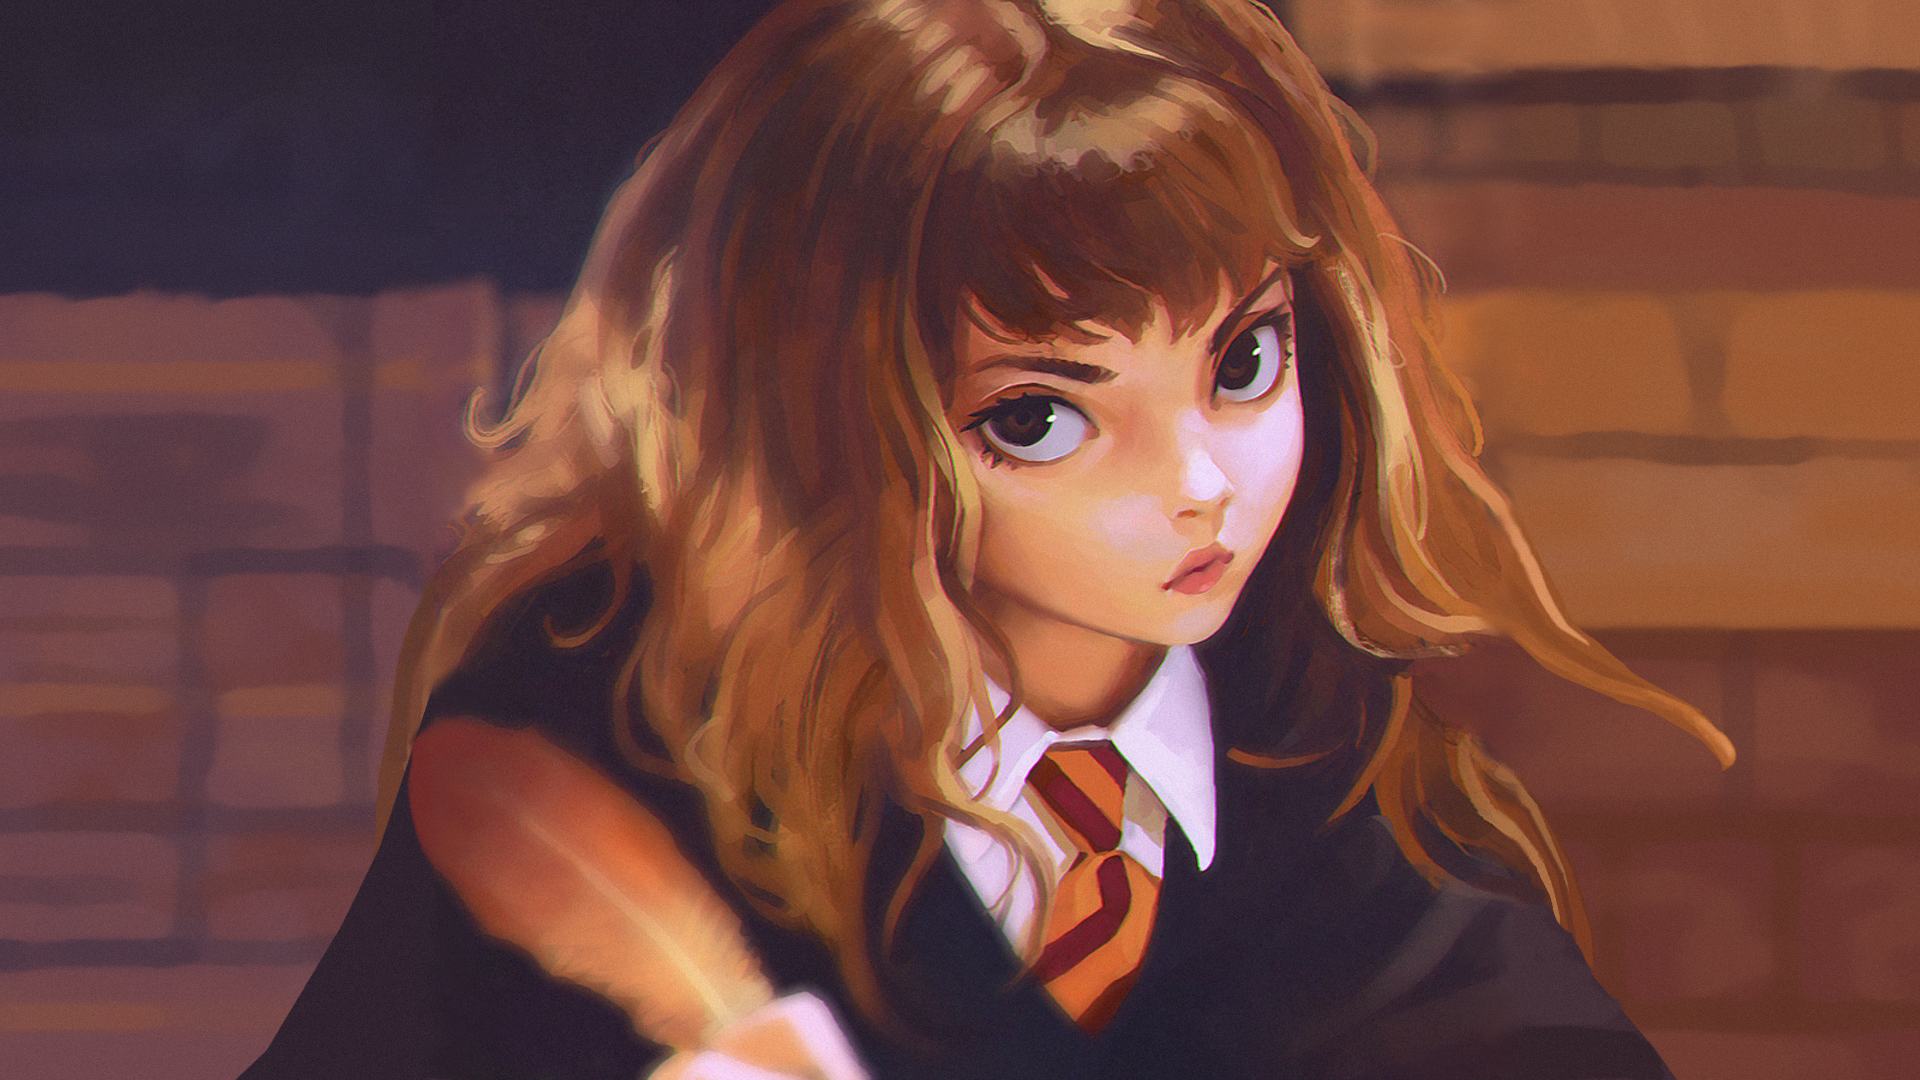 Harry Potter Anime Wallpaper FREE Picture